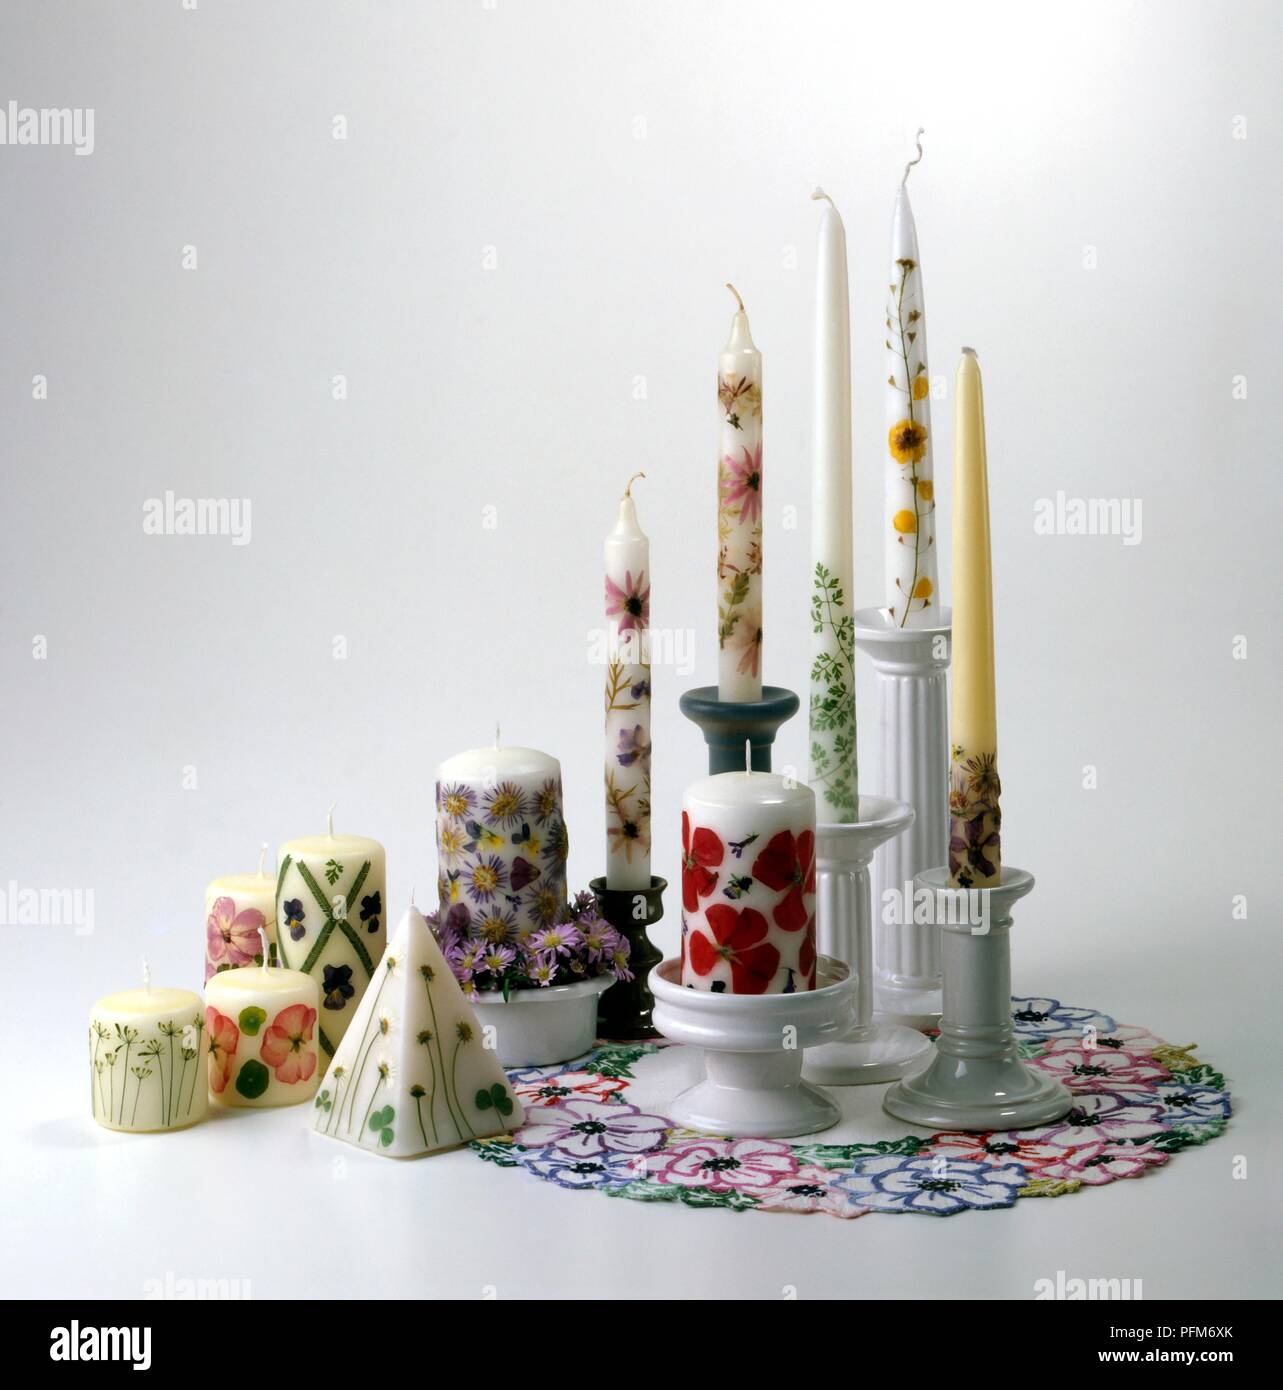 Candles decorated with floral designs Stock Photo